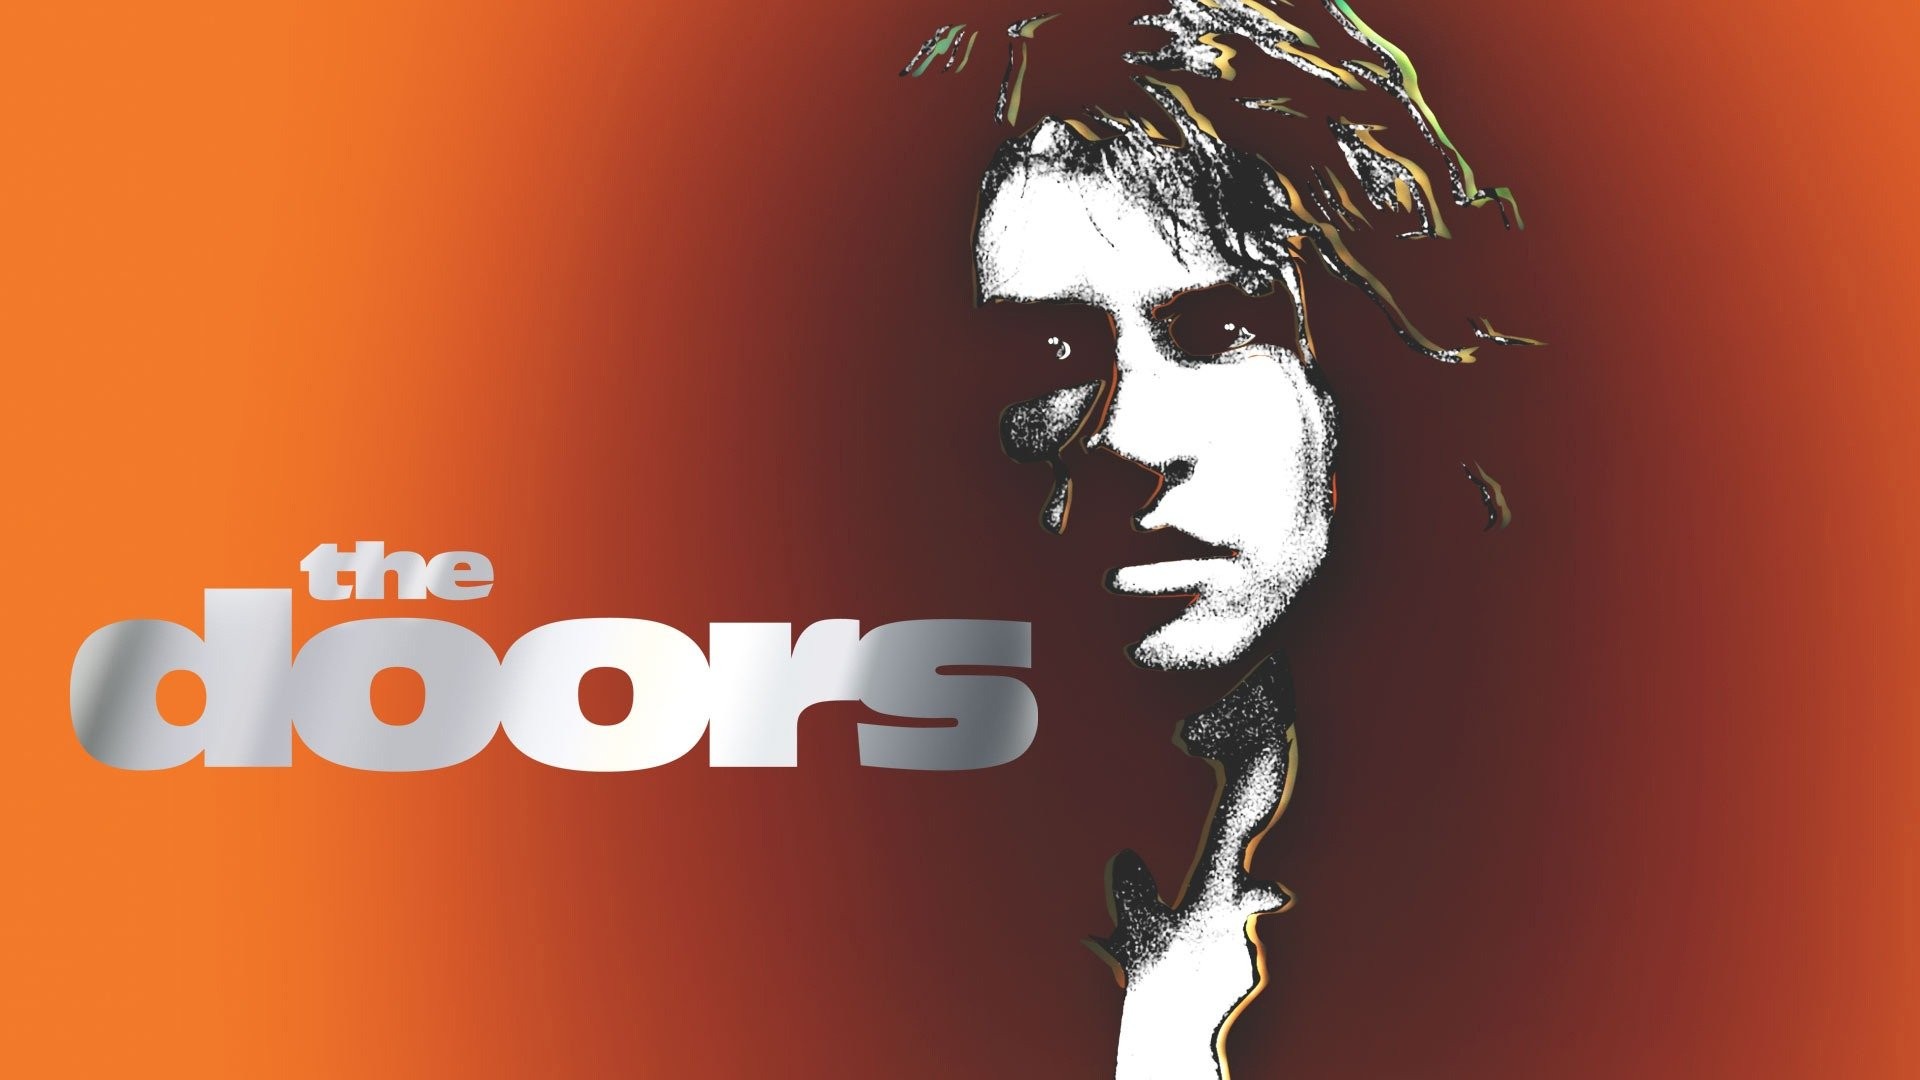 46 Facts about the movie The Doors 